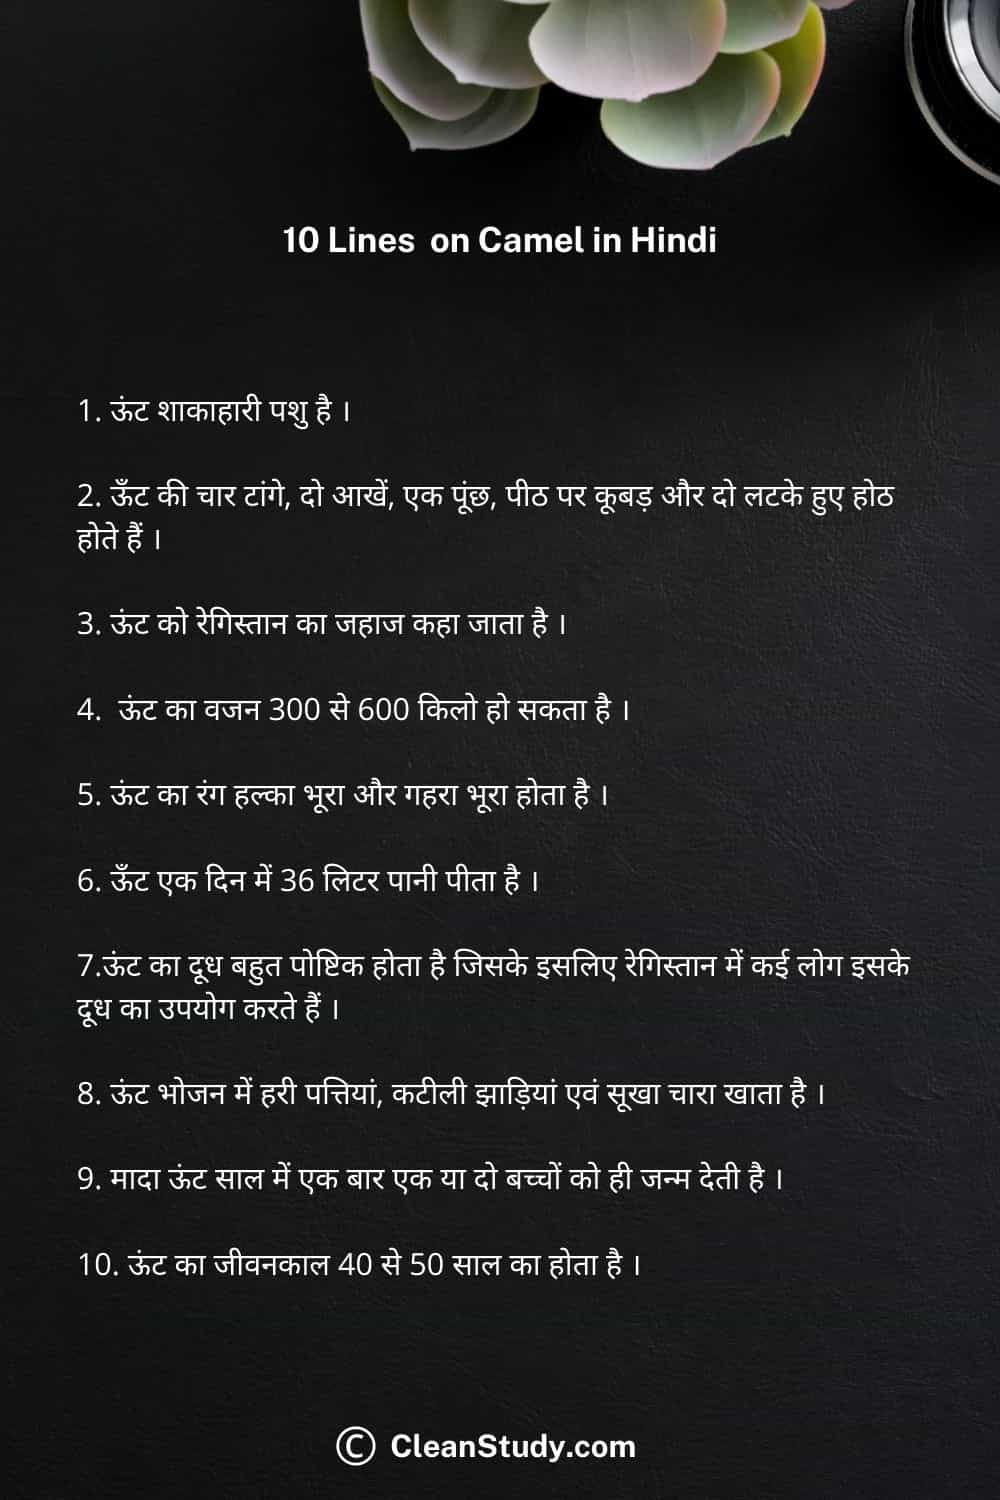 10 lines on camel in hindi